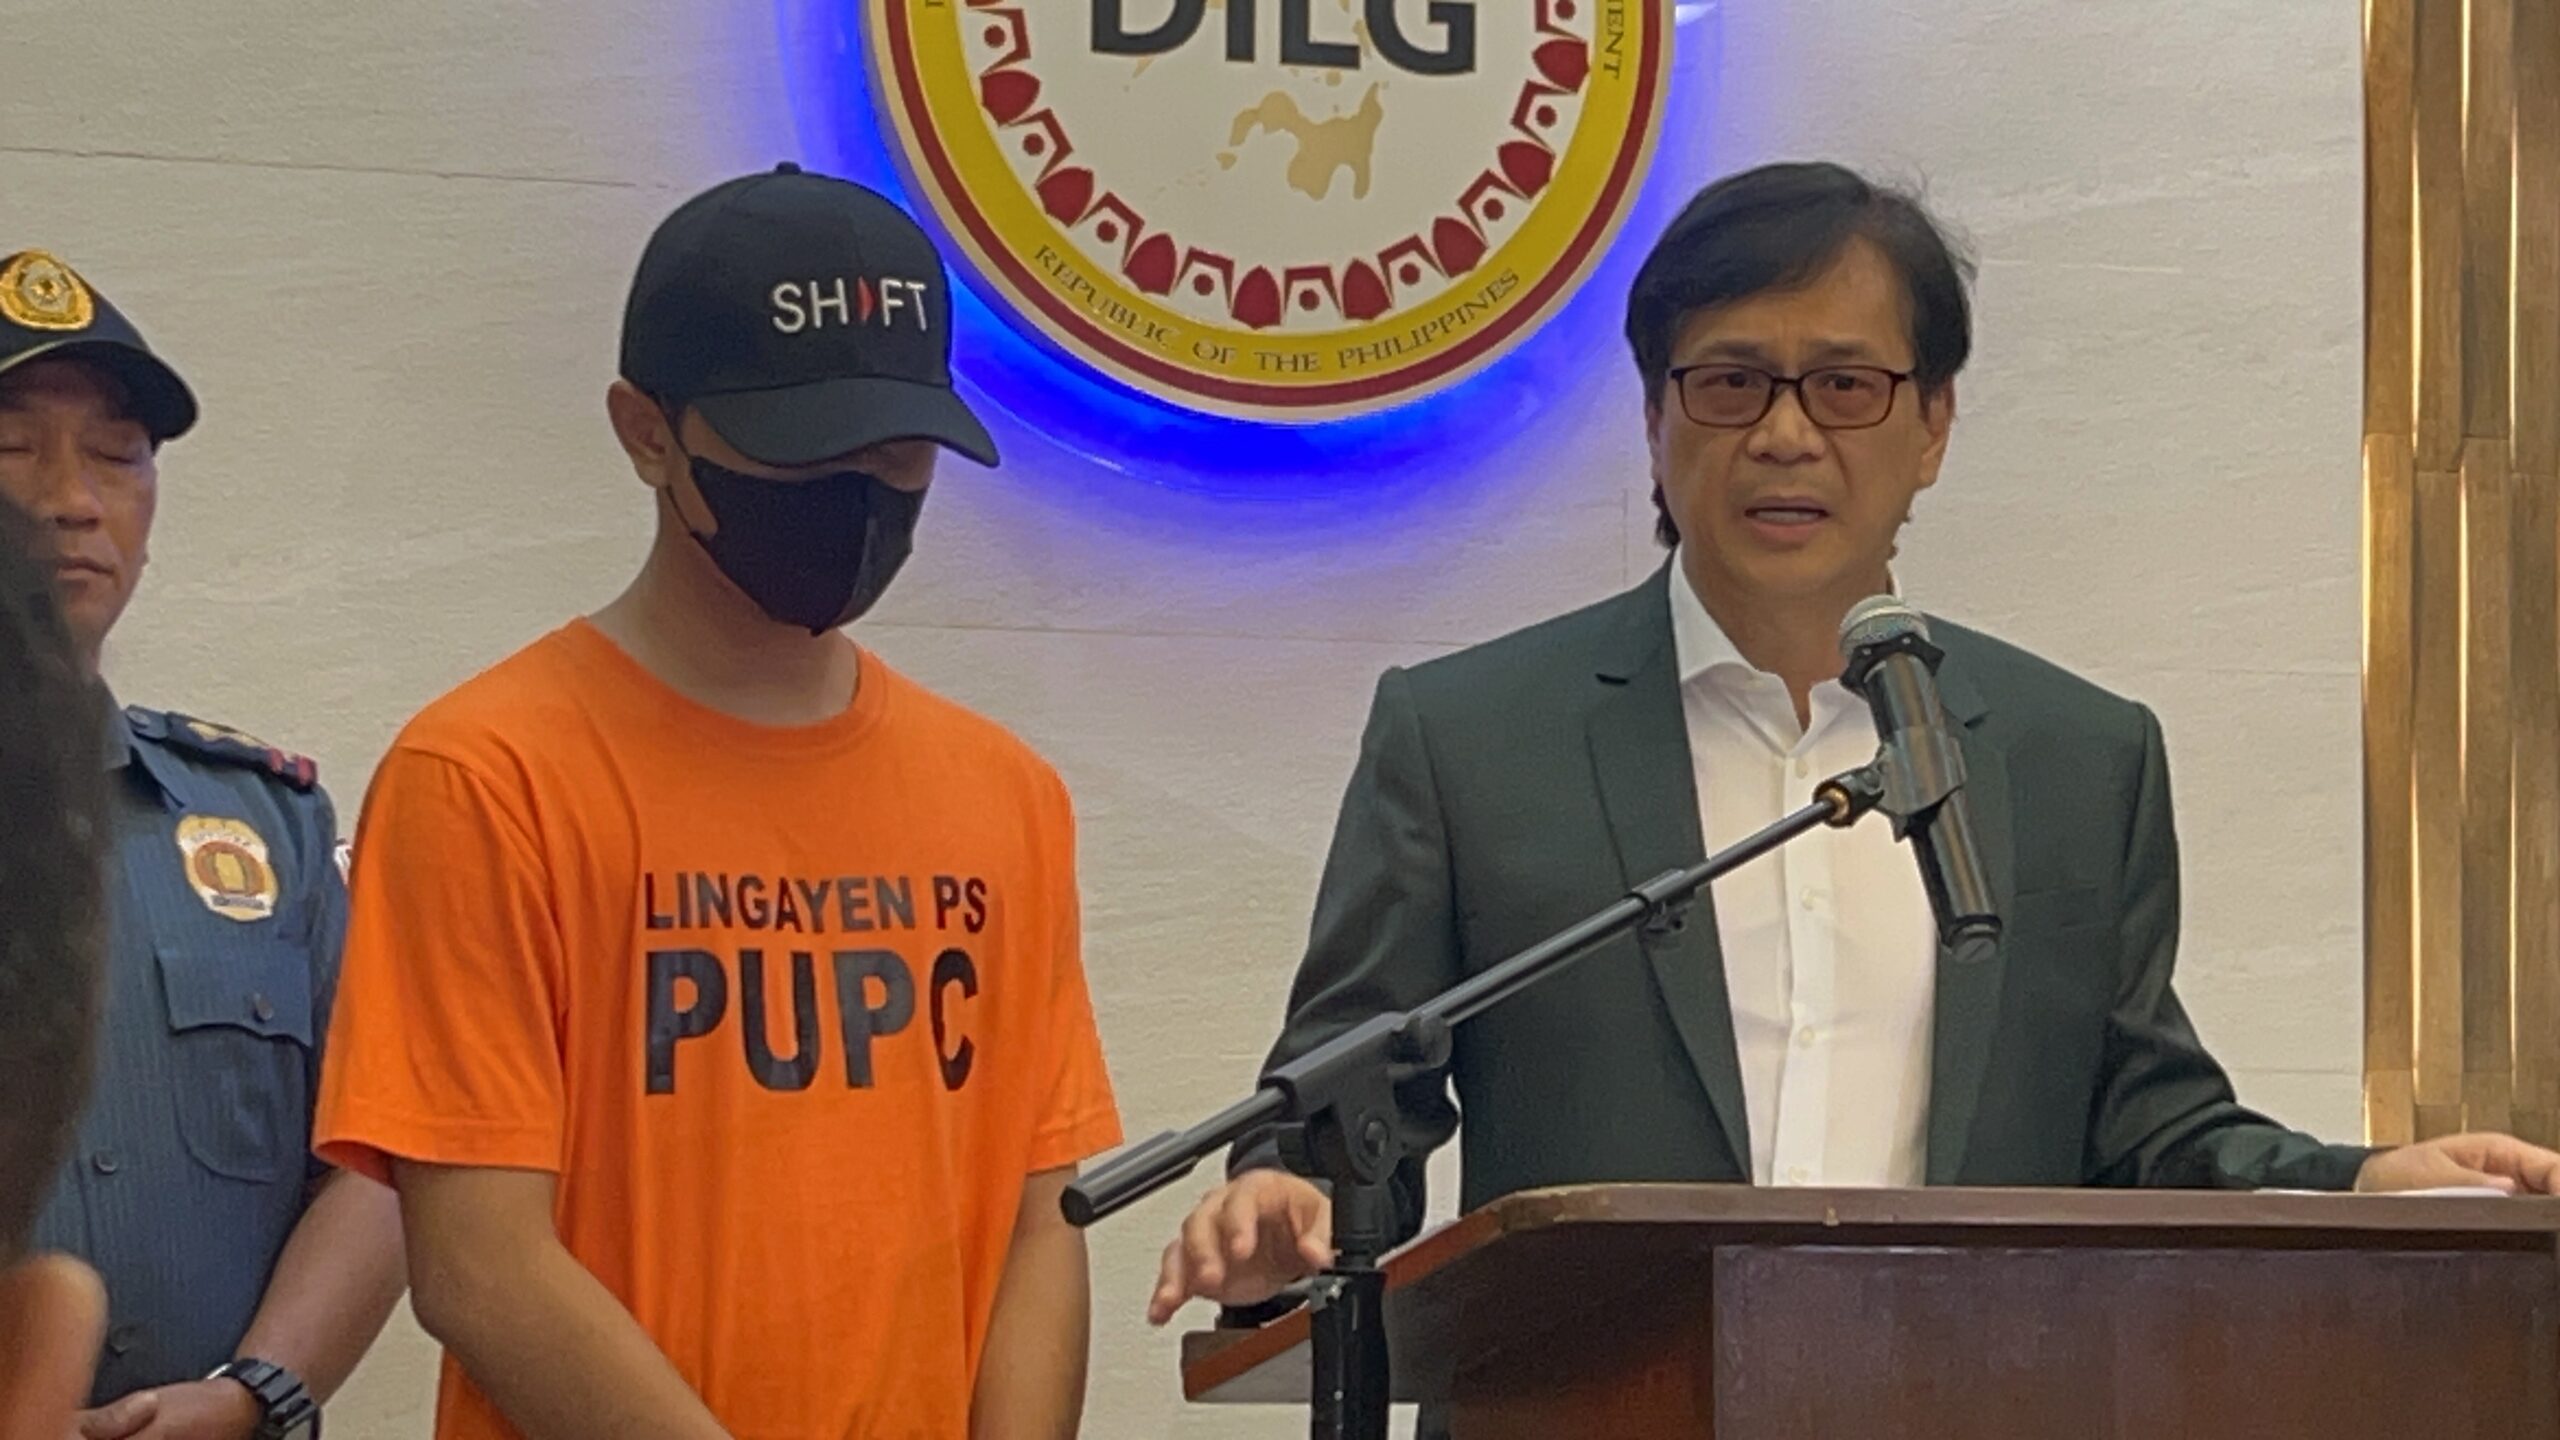 Authorities arrest man for posing as DILG chief to extort money